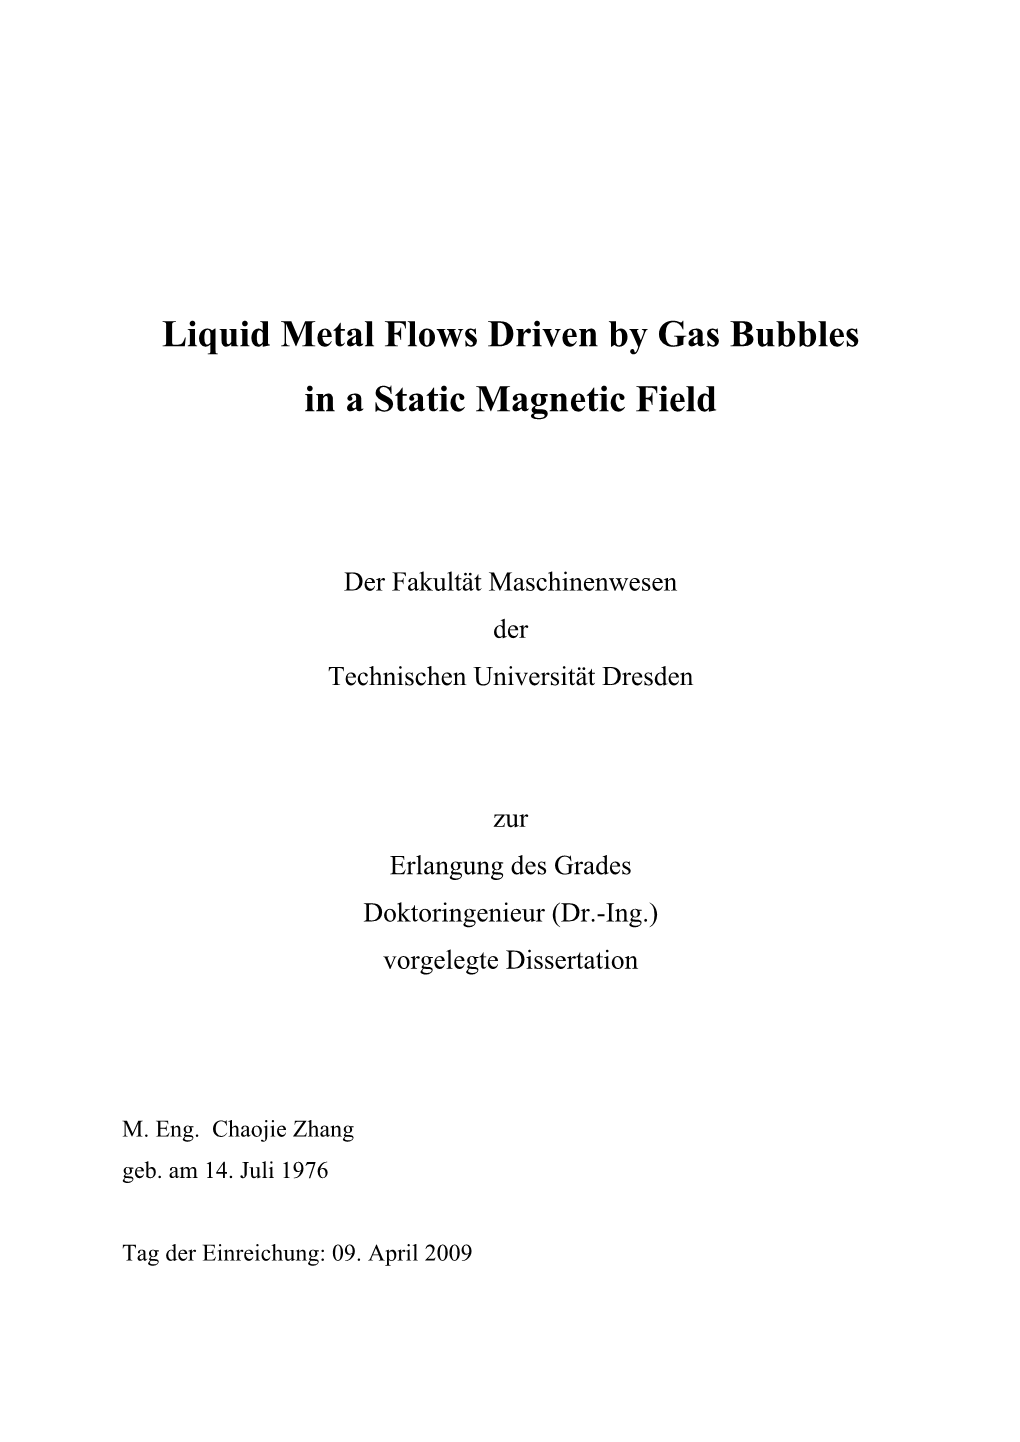 Liquid Metal Flows Driven by Gas Bubbles in a Static Magnetic Field